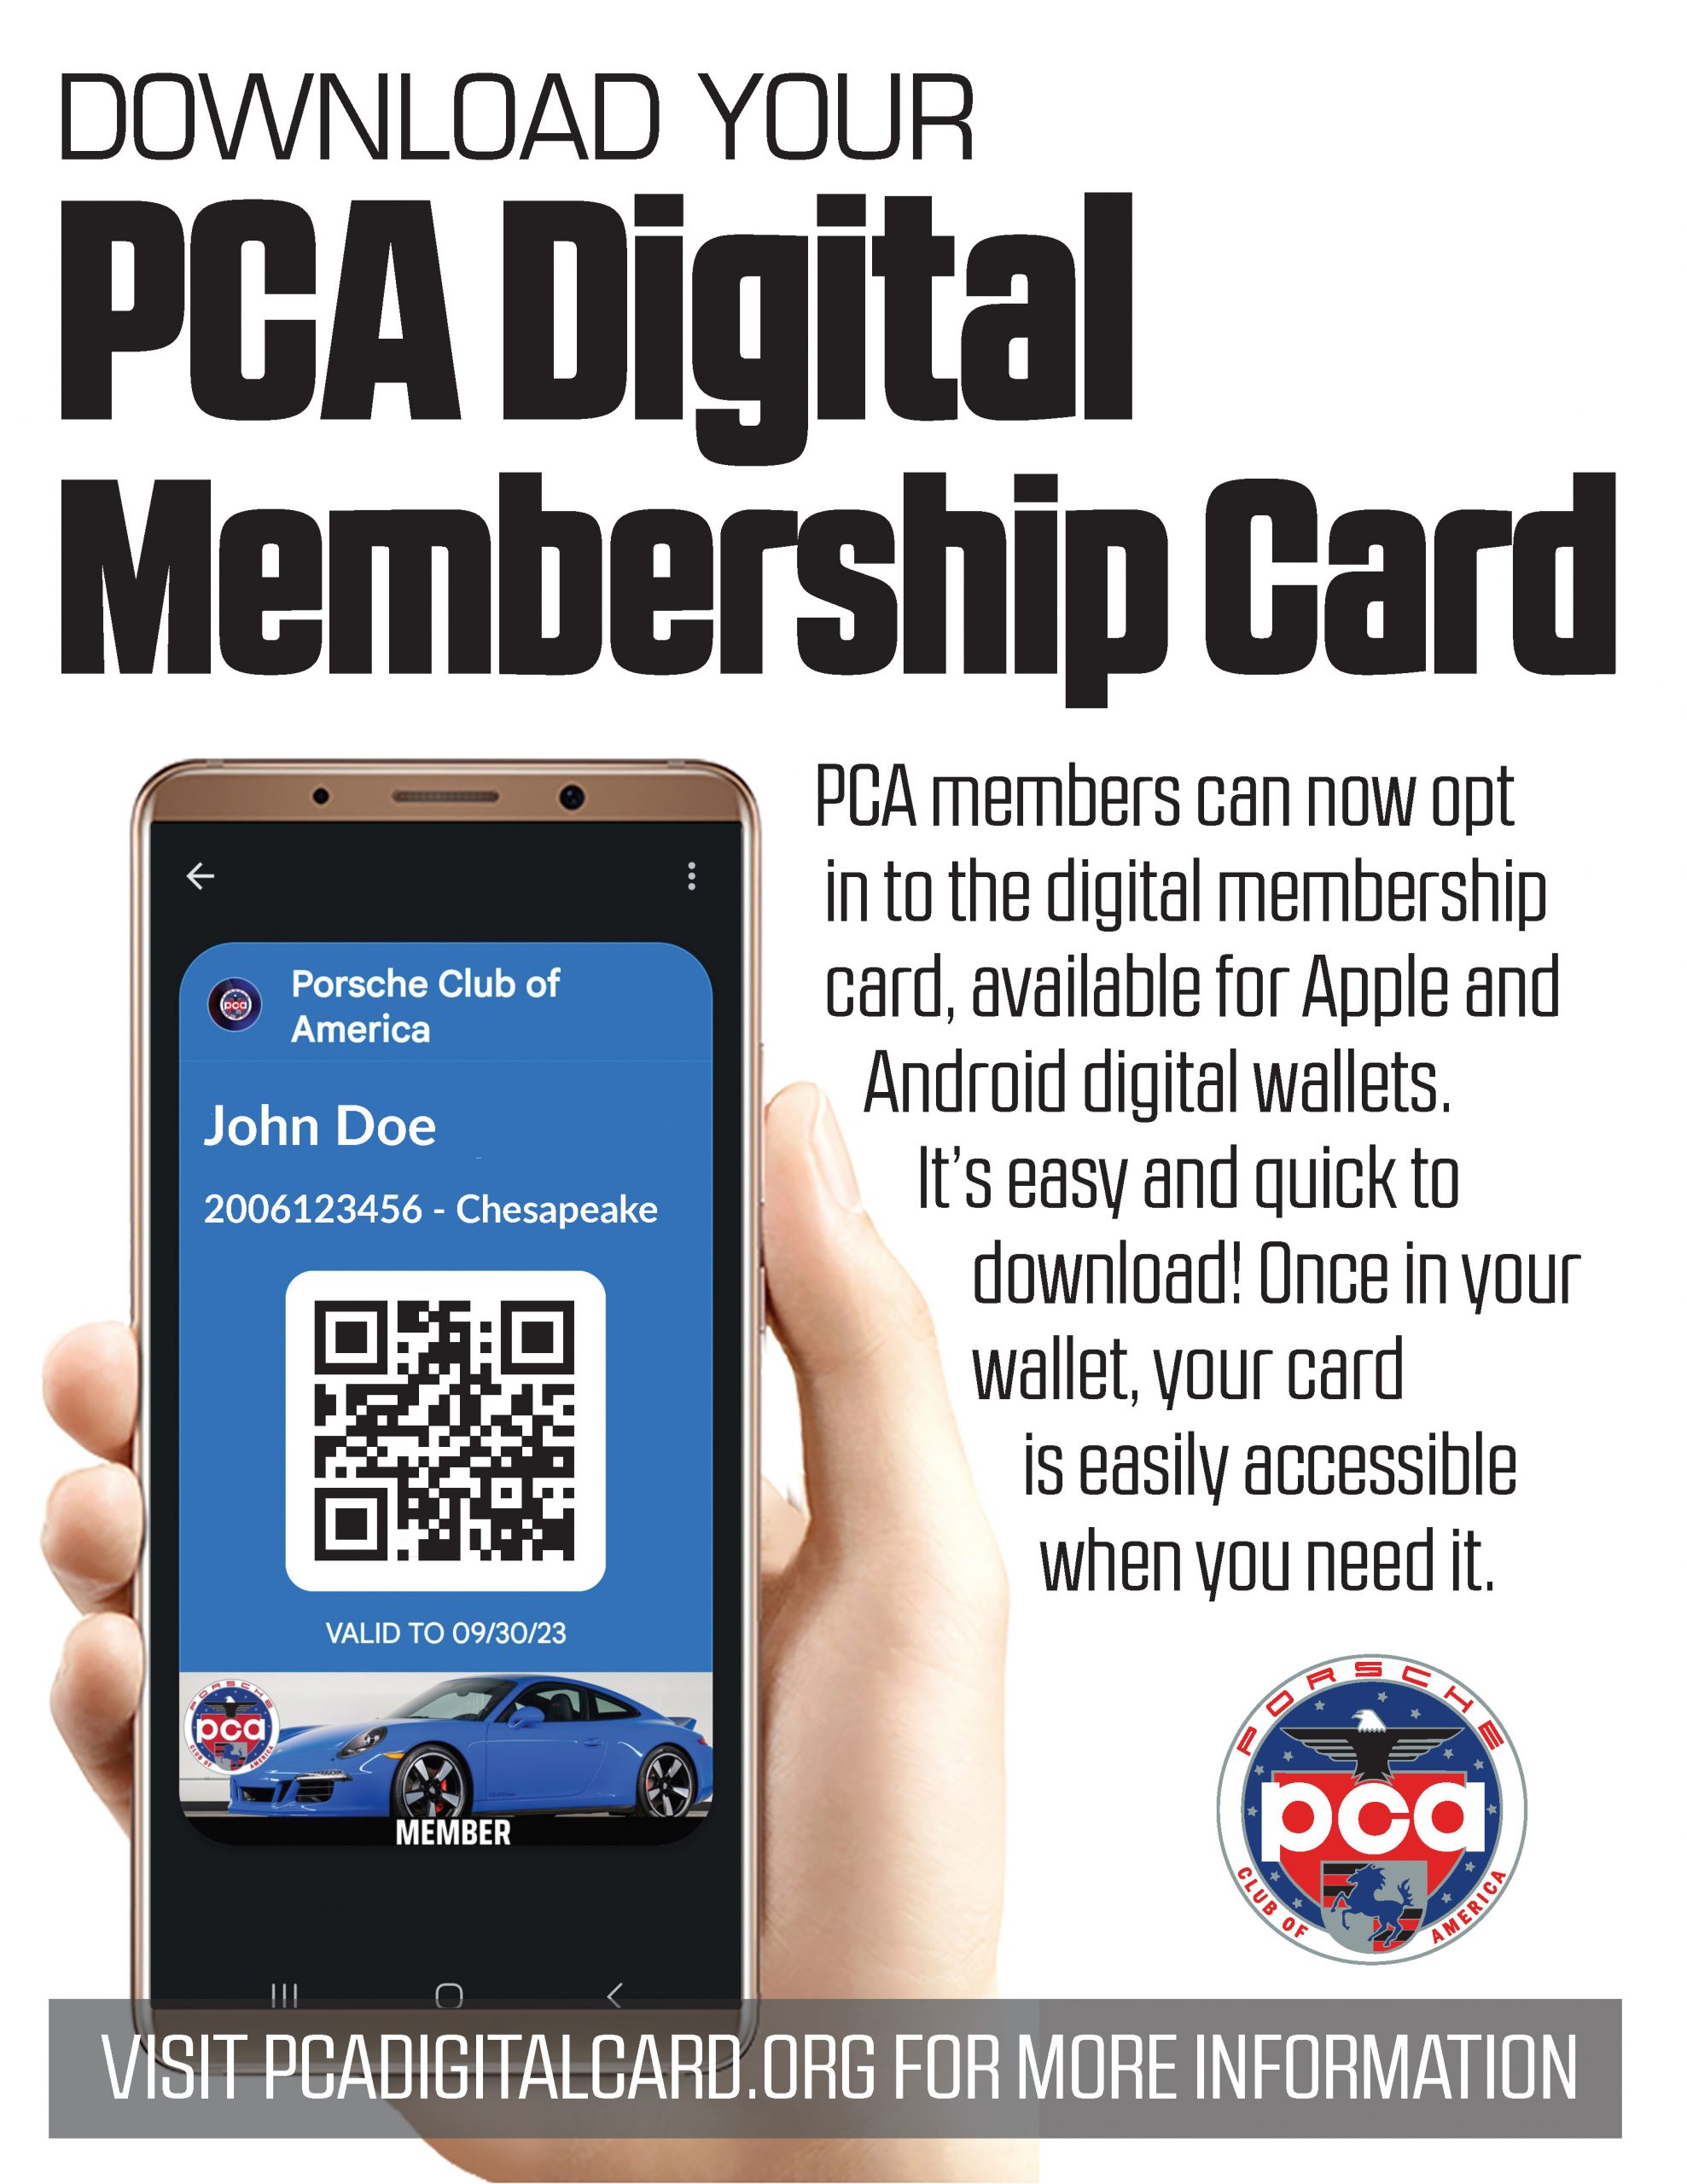 Introducing PCA's Digital Membership Card now available for download!